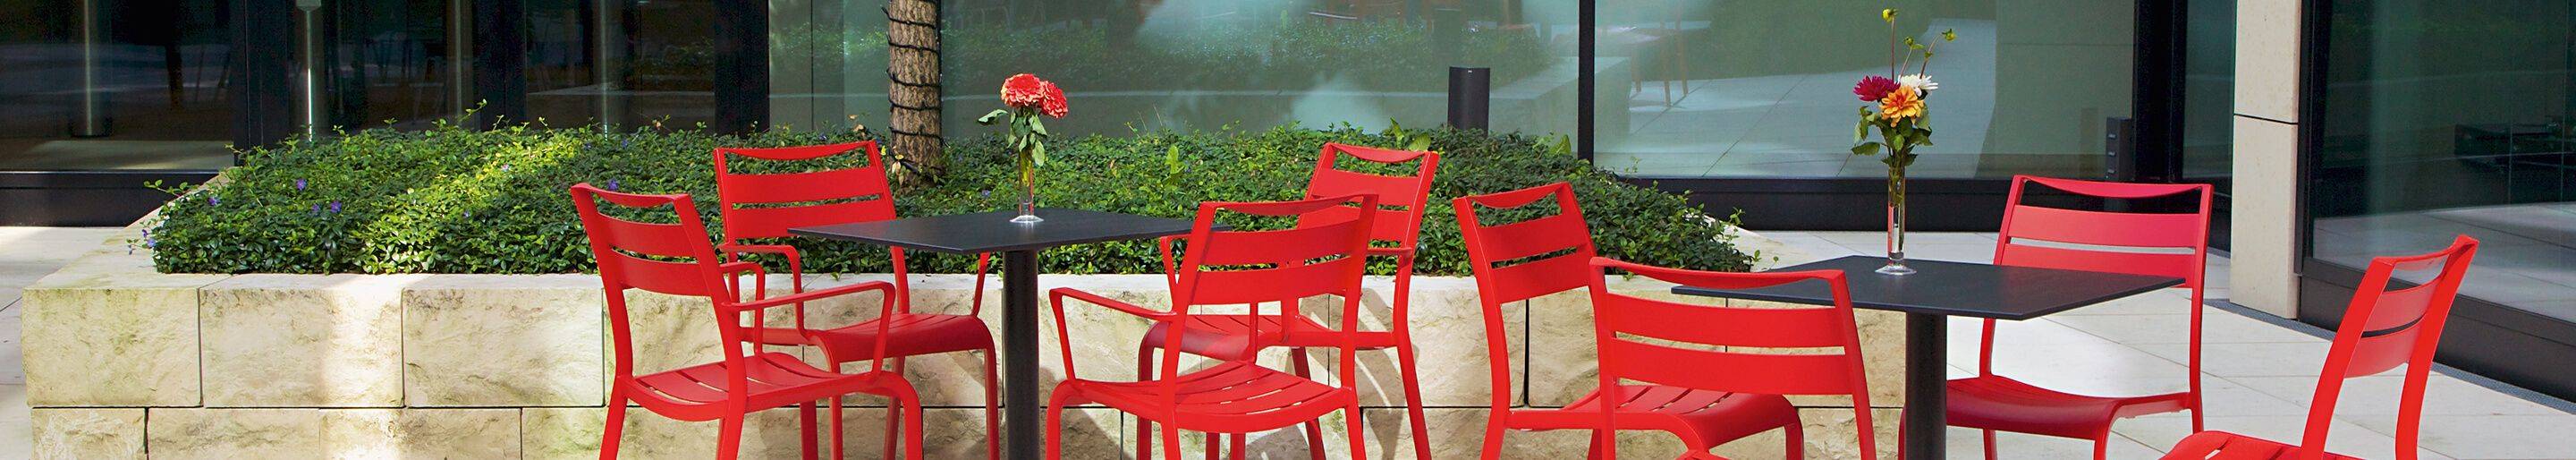 Outdoor Metal chairs for your hotel or restaurant